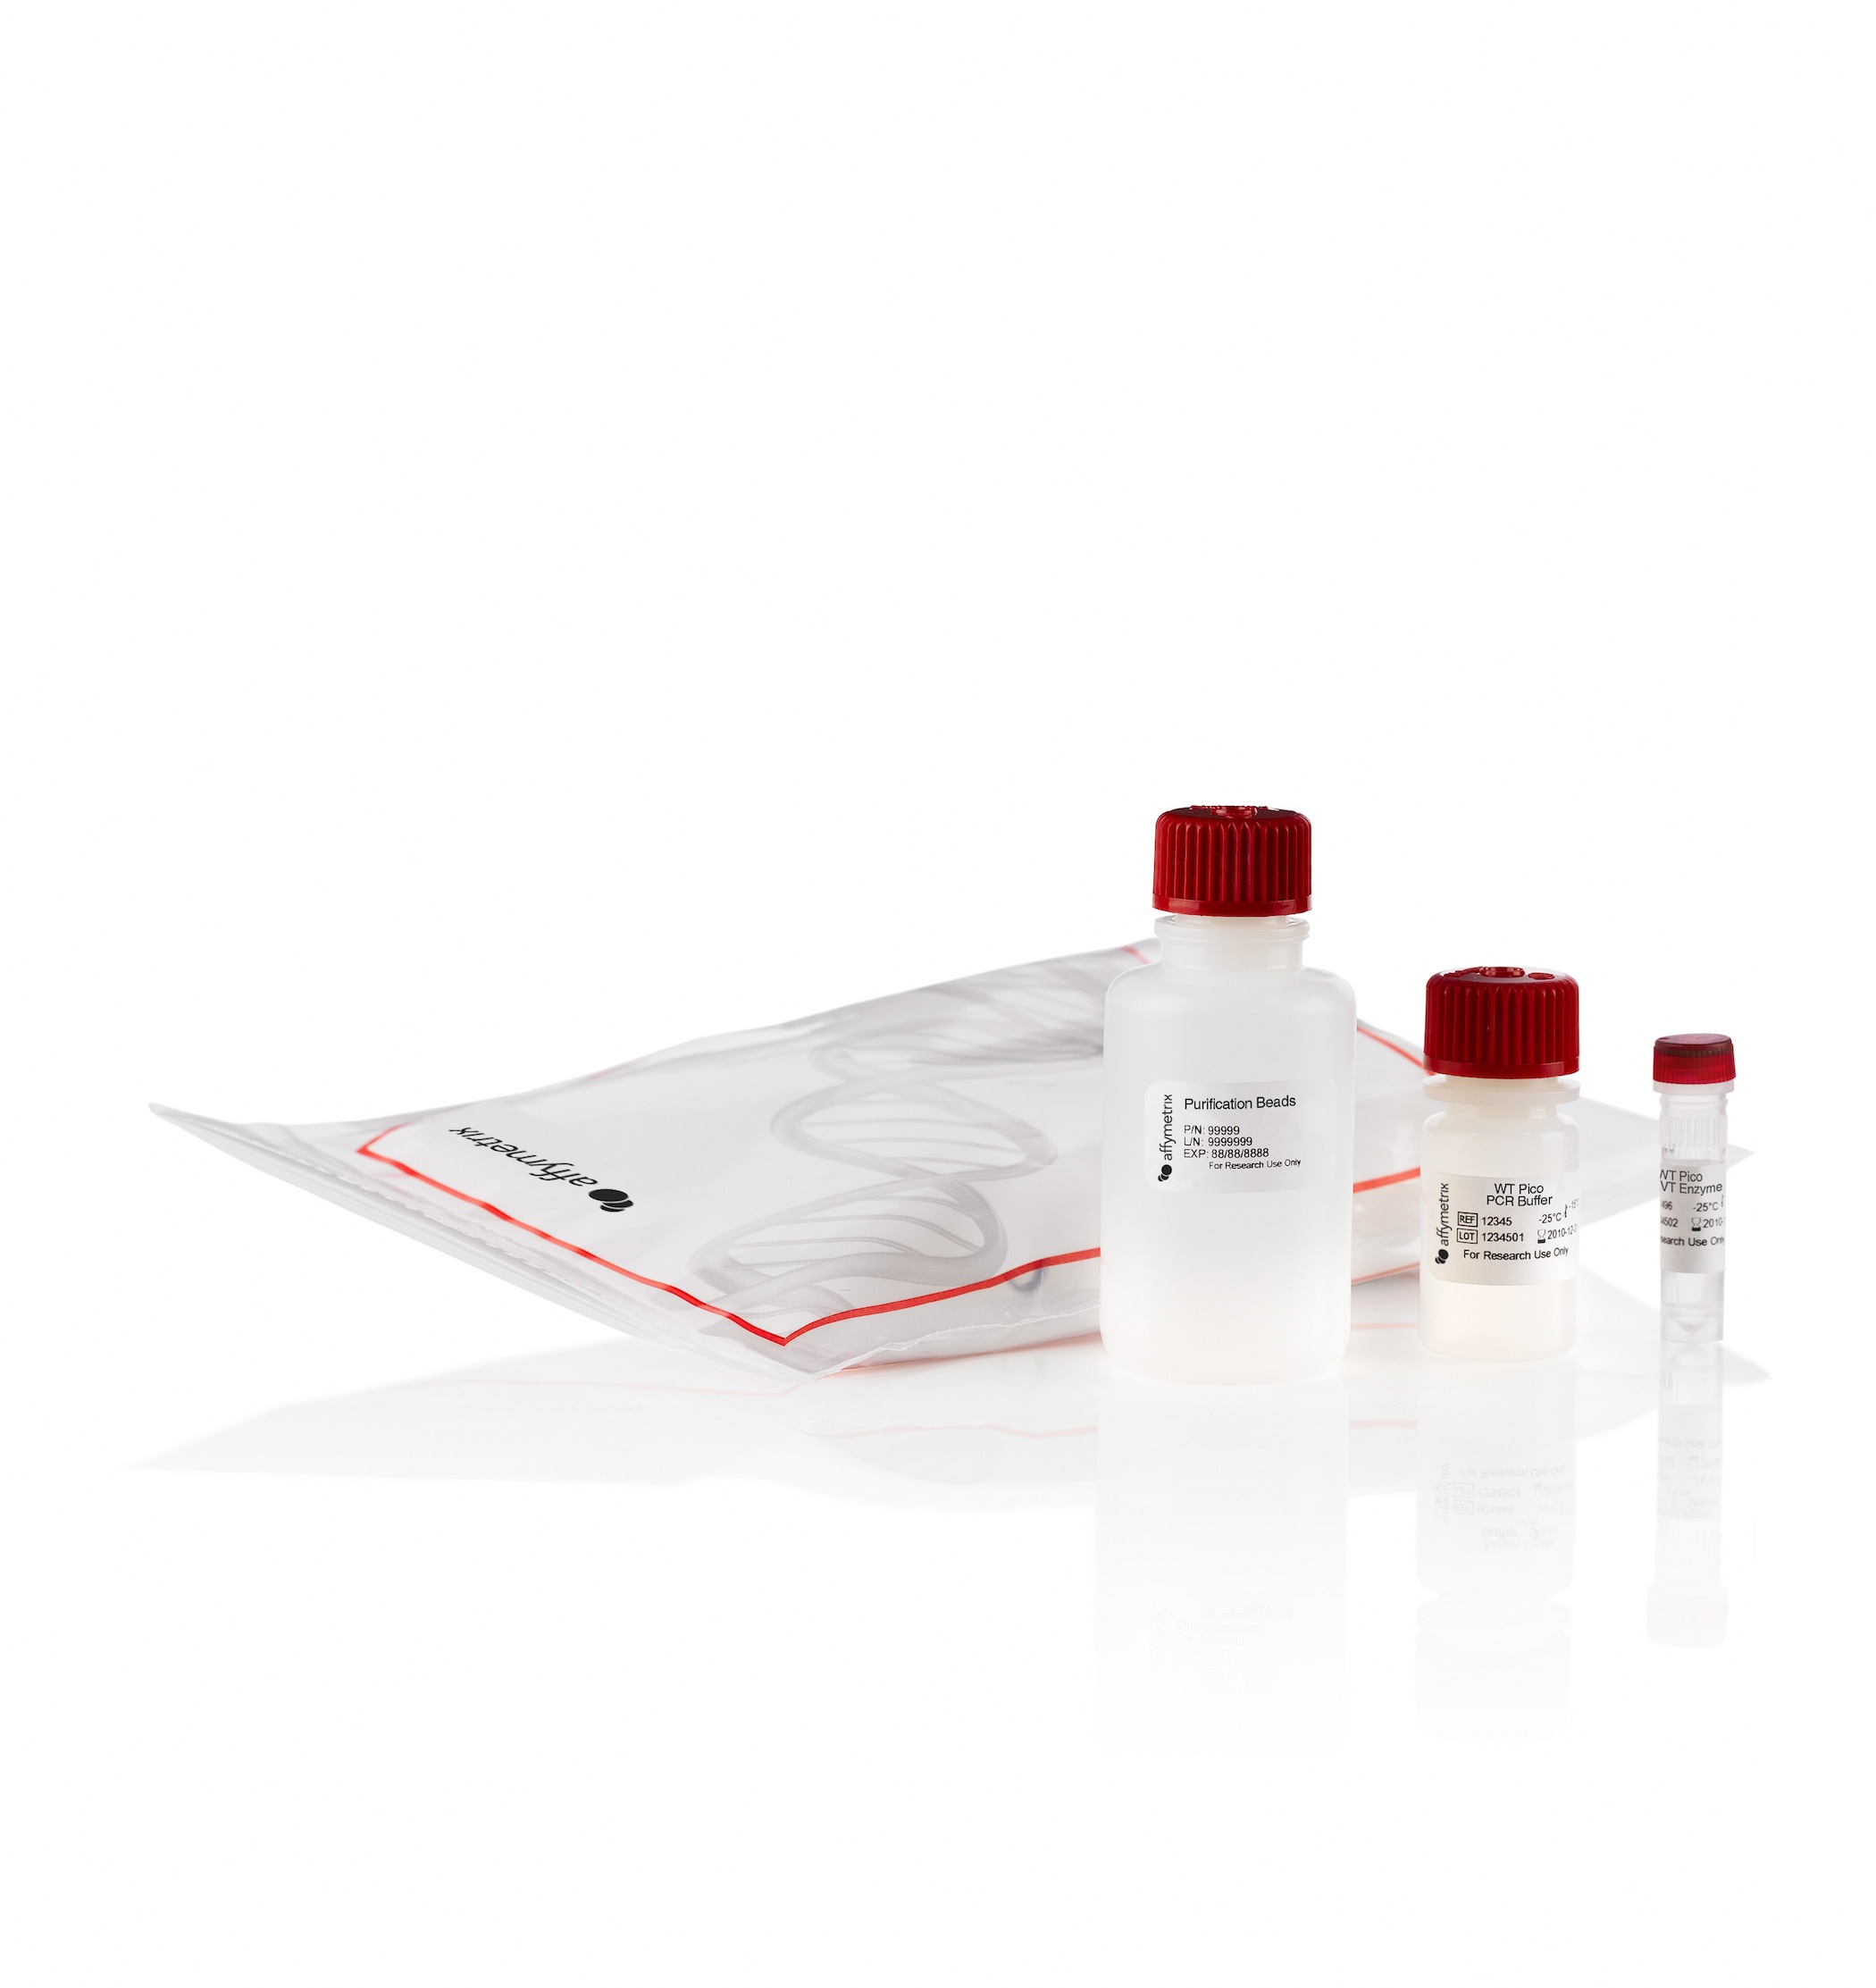 Image: The GeneChip WT Pico Kit for gene expression array target preparation from very small samples (Photo courtesy of Affymetrix).